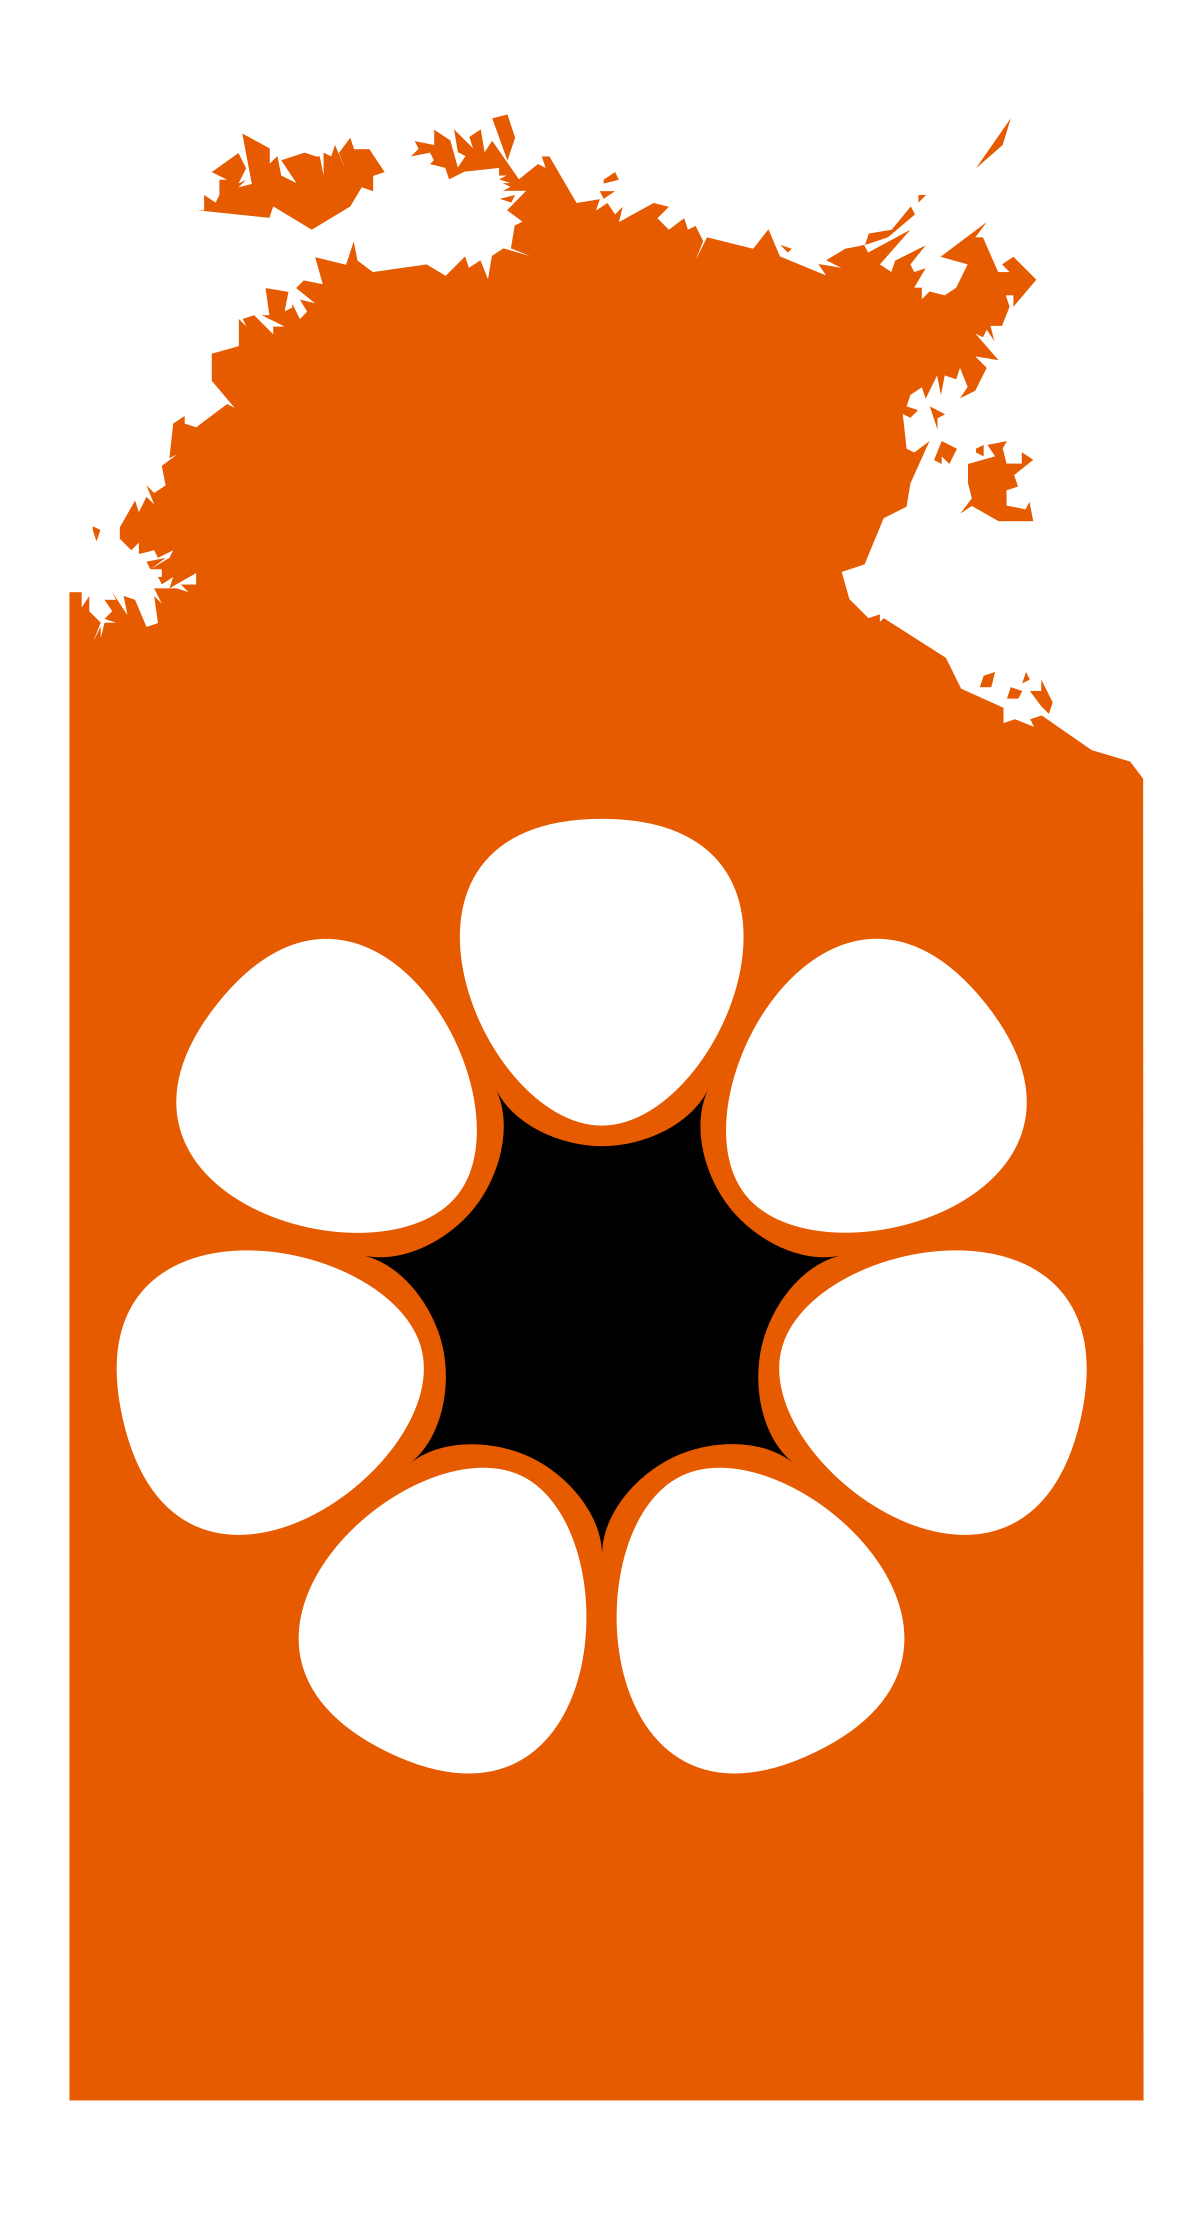 File:Flag-map of Northern Territory.svg - Wikimedia Commons